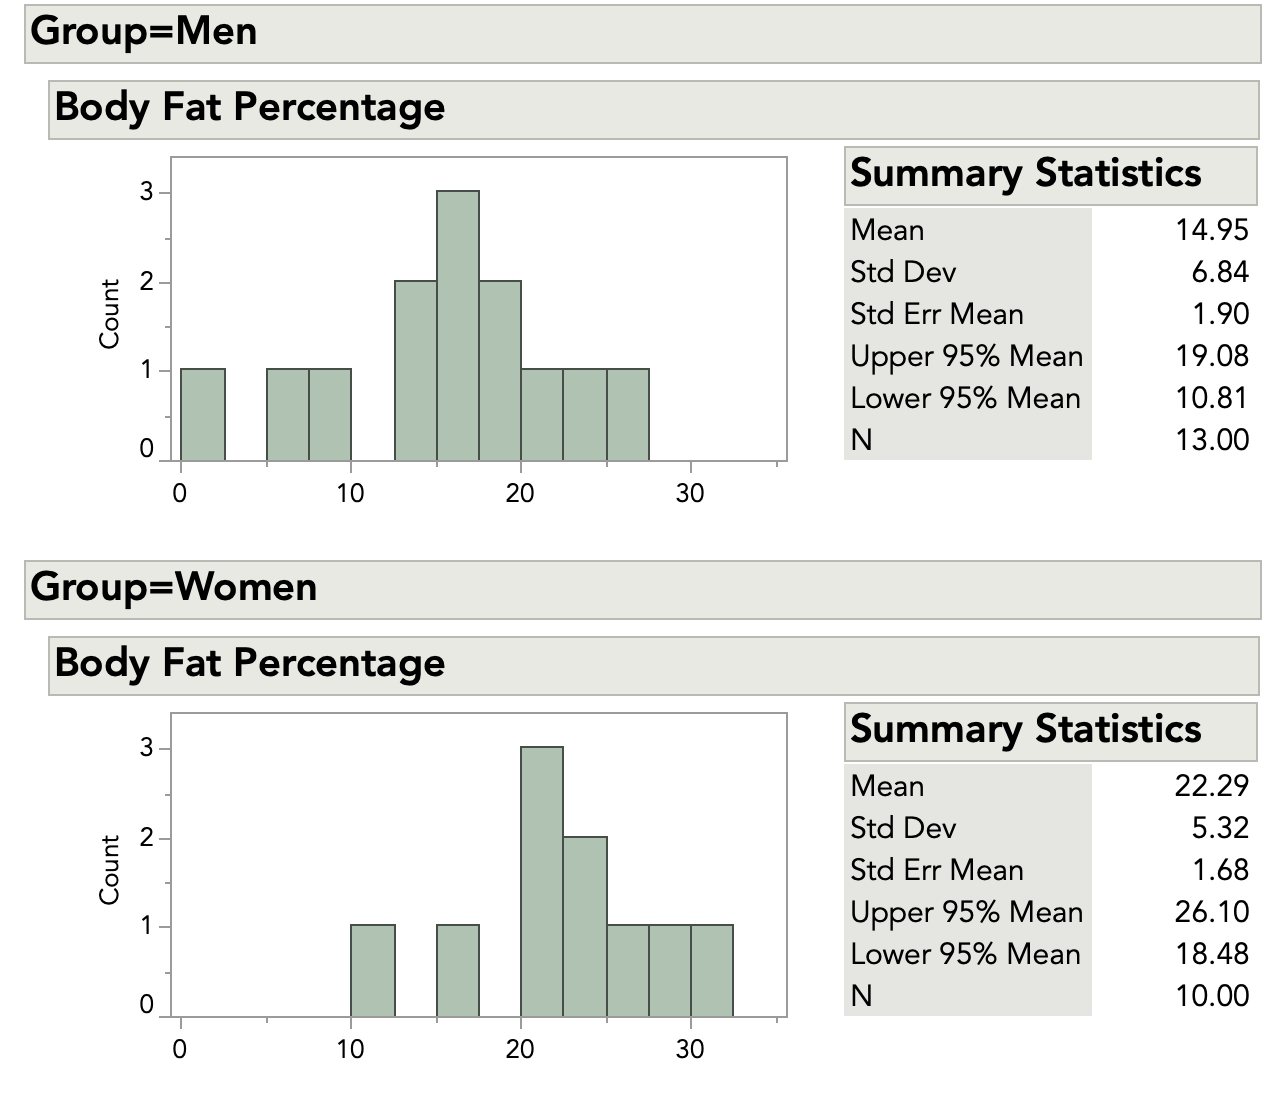 Histogram and summary statistics for the body fat data